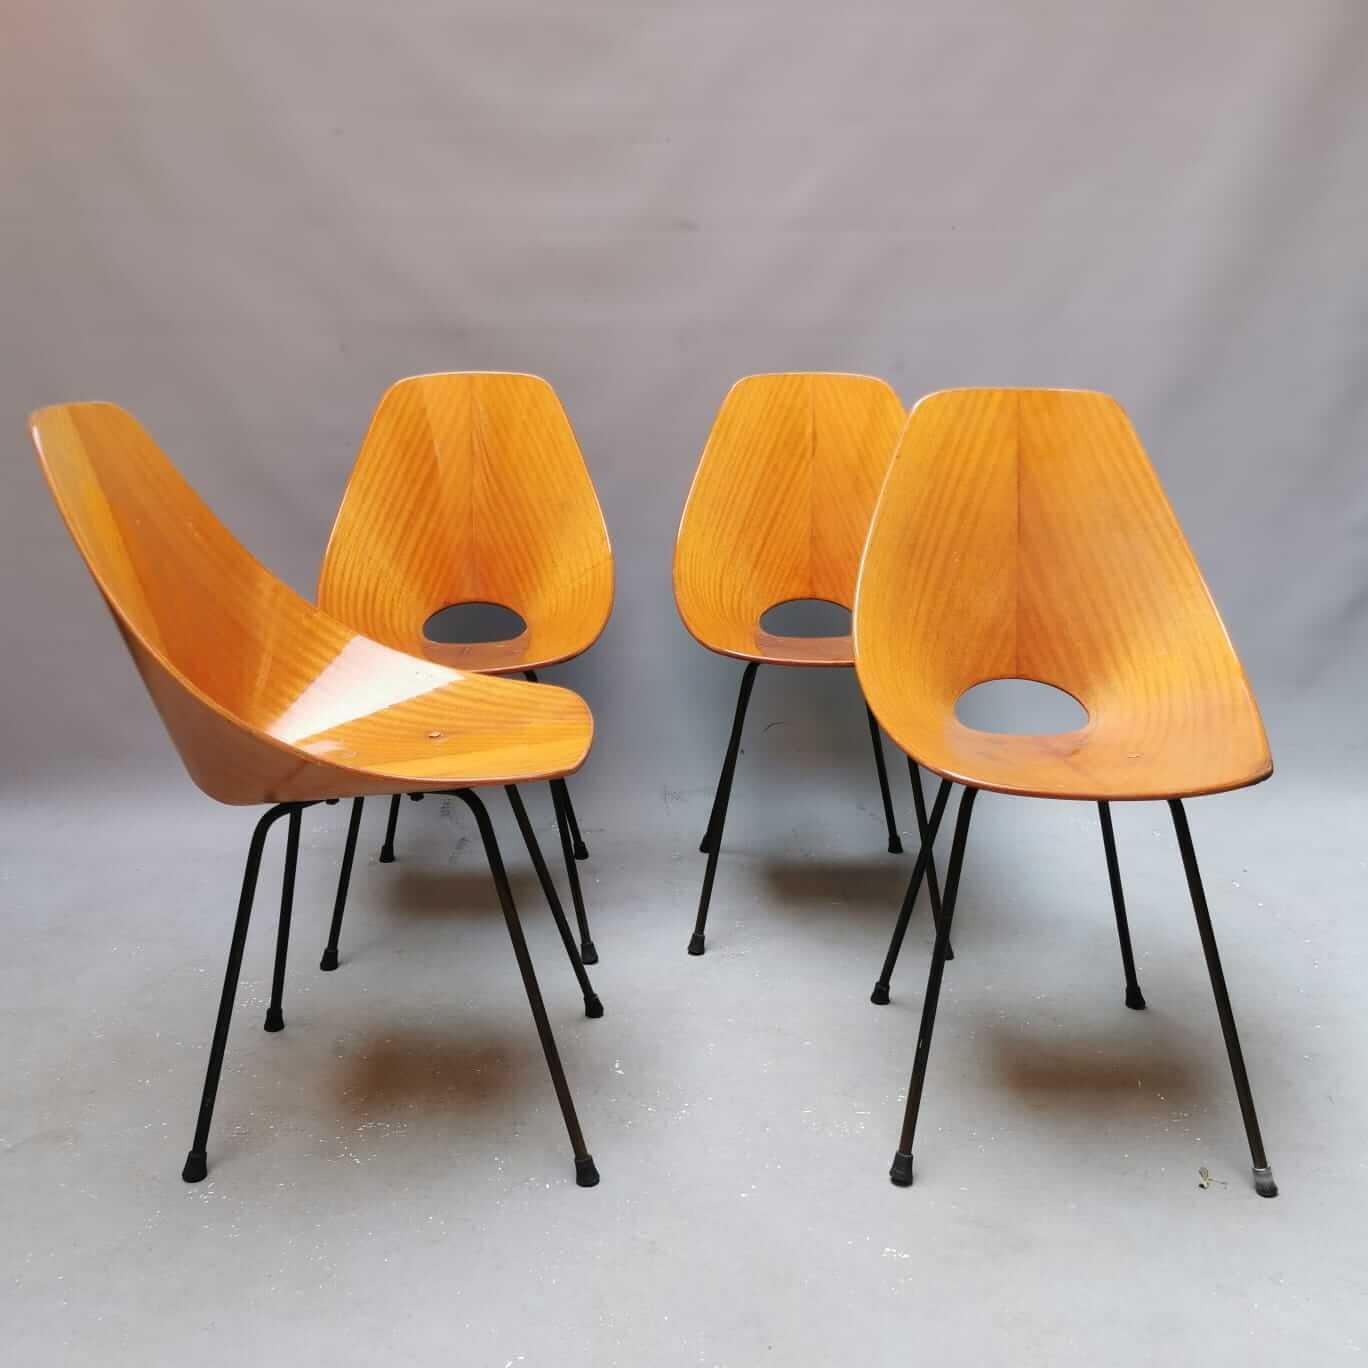 Medea chairs are a classic design created by Italian architect and designer Vittorio Nobili in 1955. The chairs are named after the mythical Greek sorceress Medea, known for her intelligence and cunning.

The Medea chairs are made from bent metal